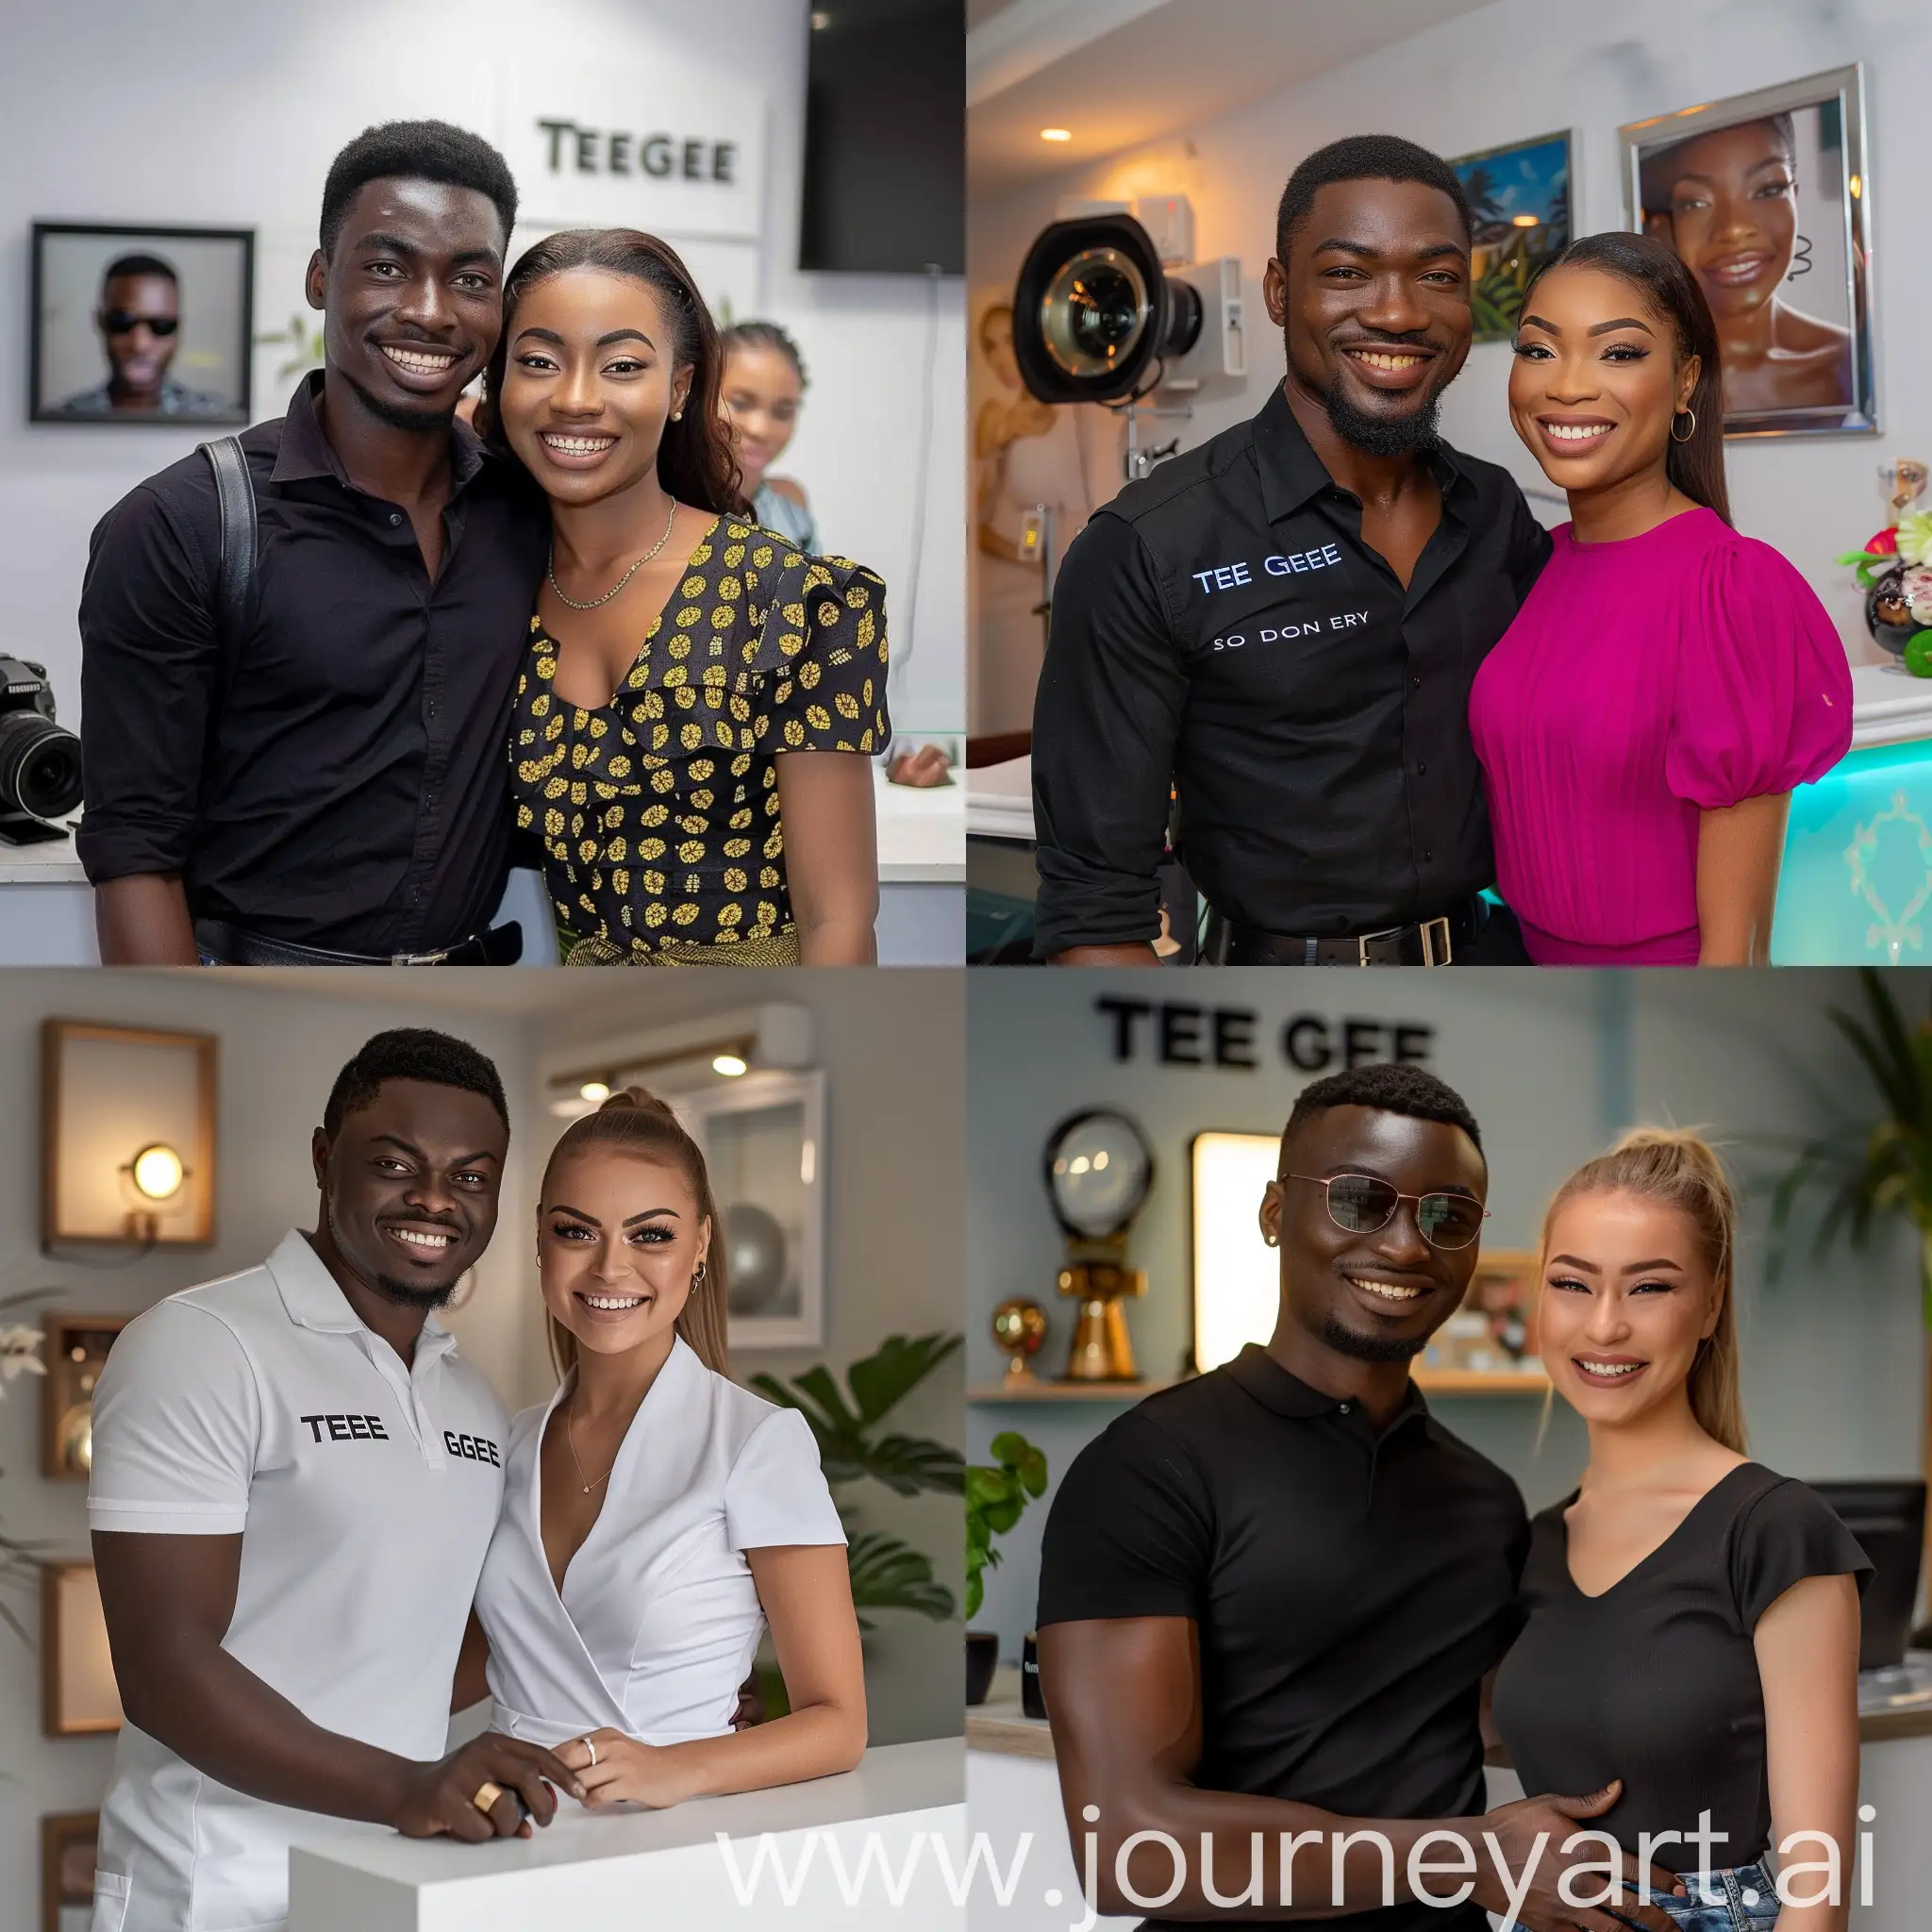 Modern-Photo-Studio-Reception-Nigerian-Photographer-and-Receptionist-Smiling-at-TeeGee-Lens